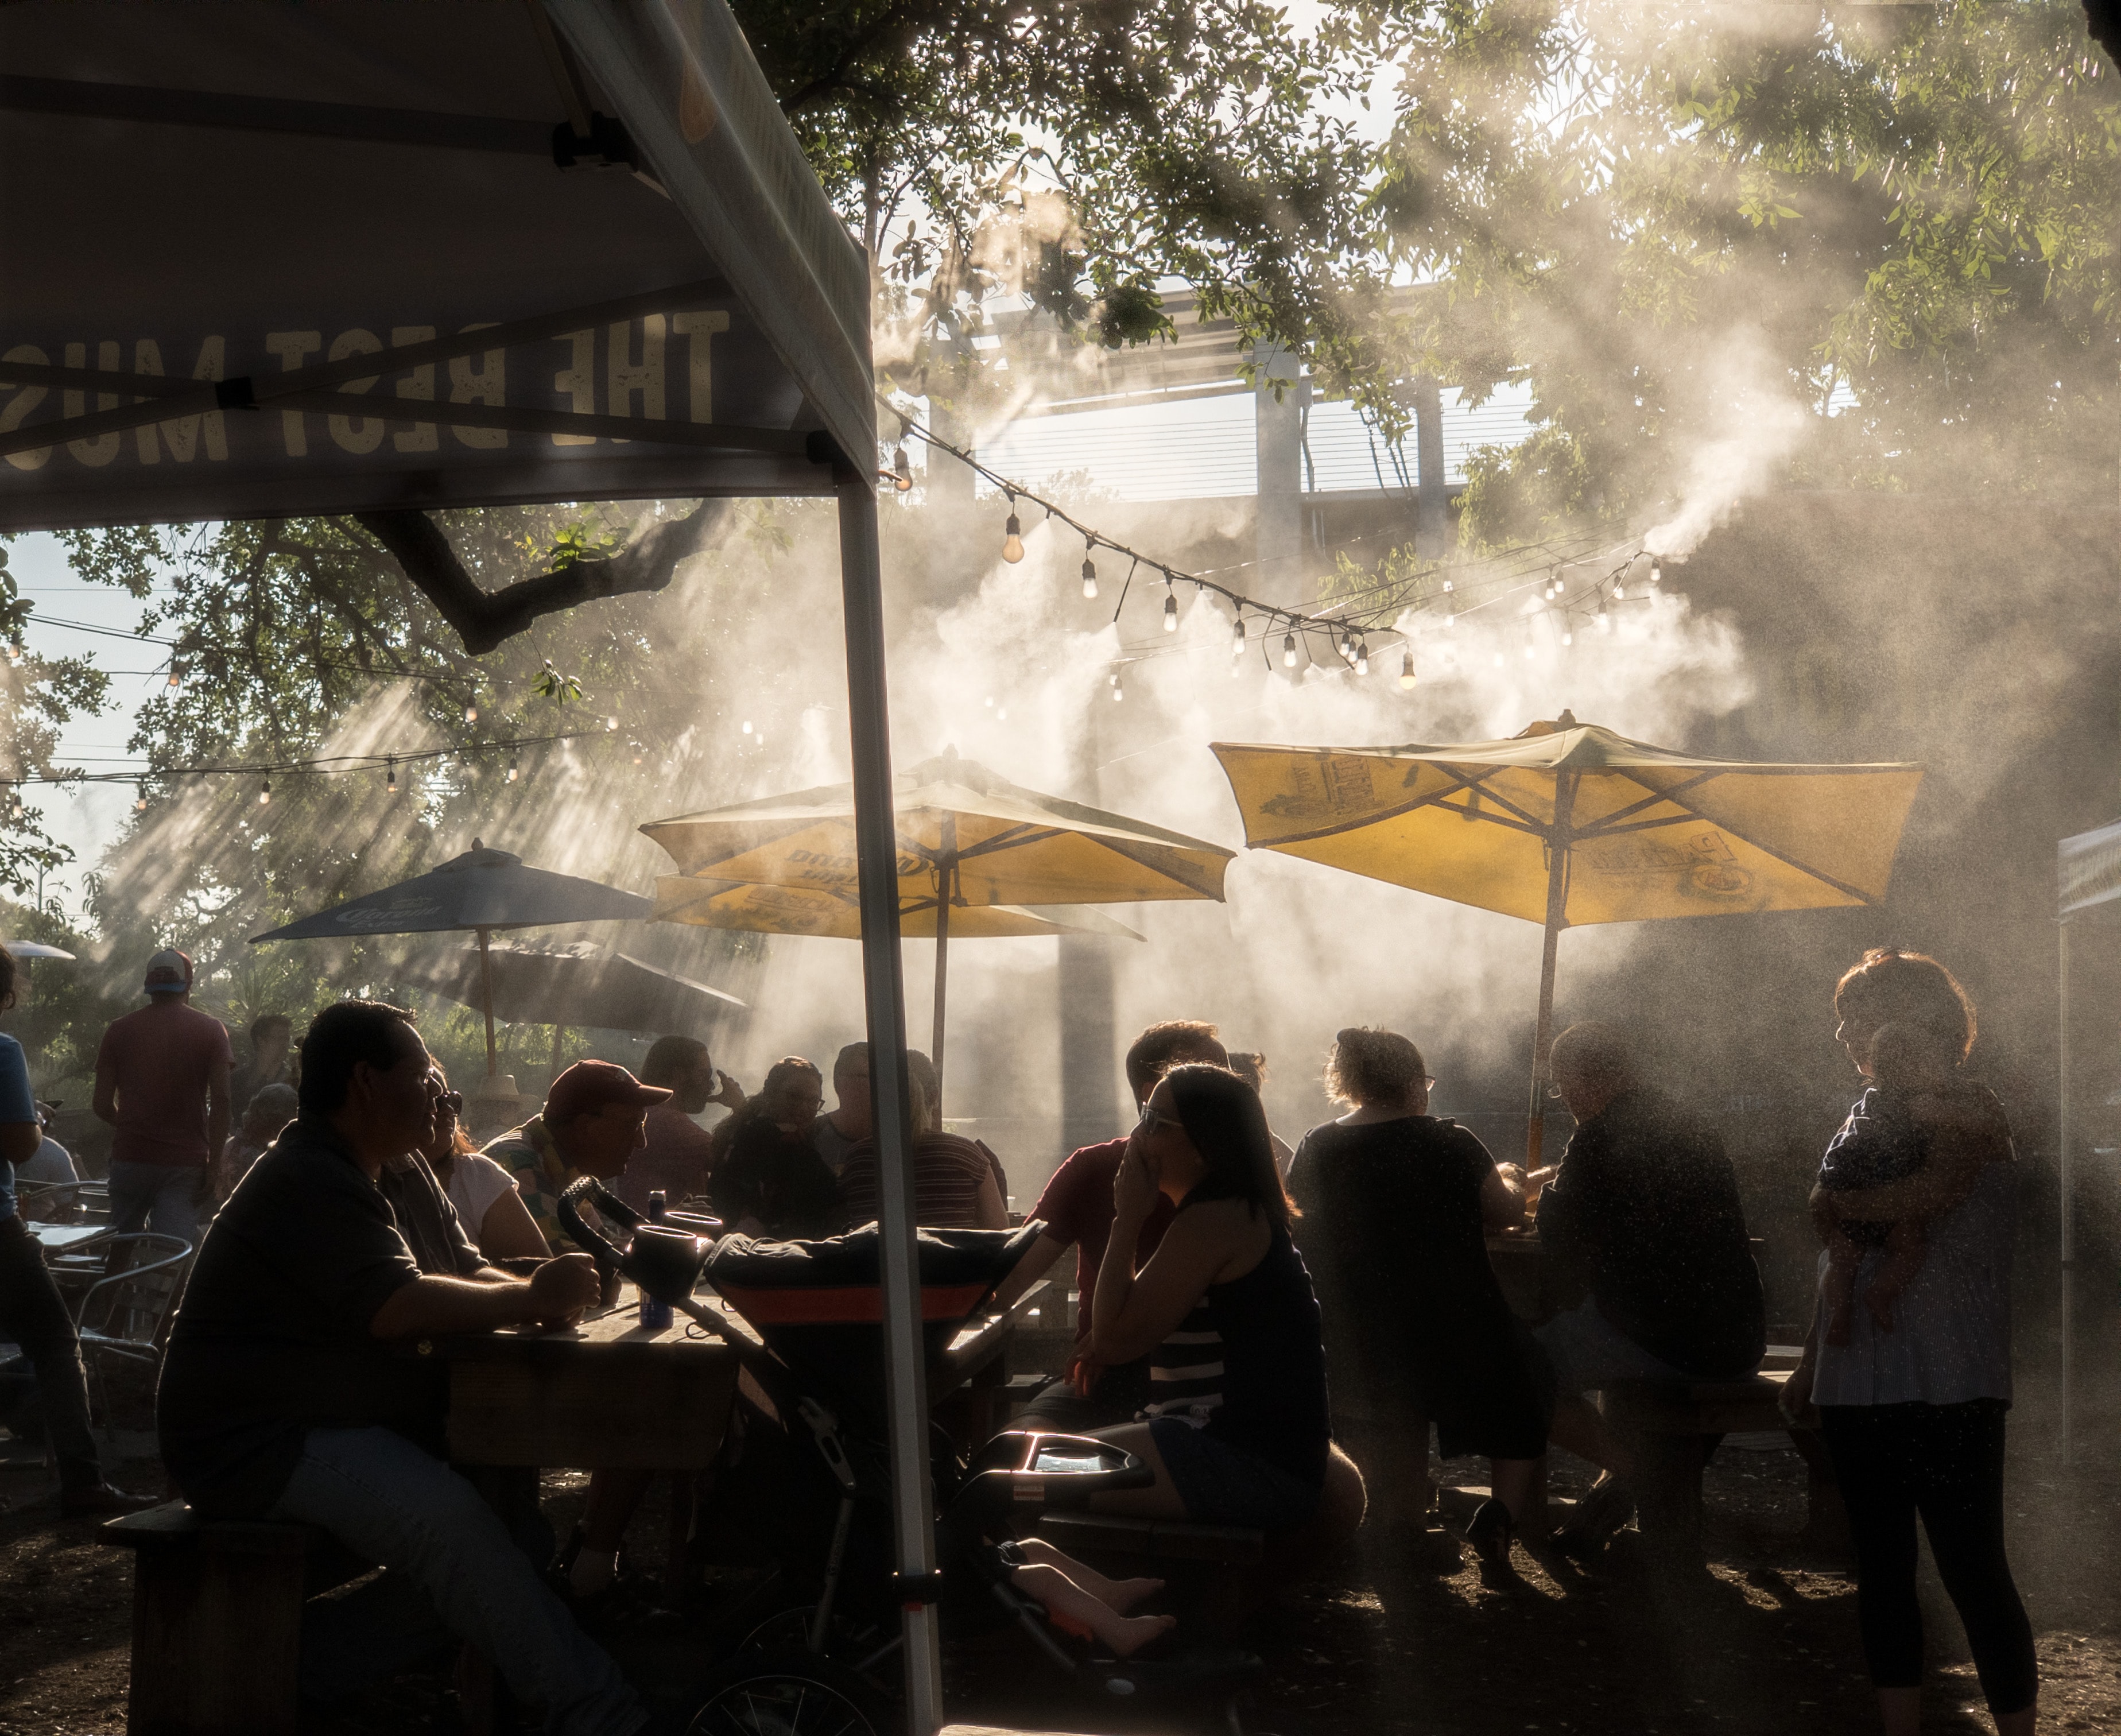 Misty patio with restaurant umbrellas and hanging lights